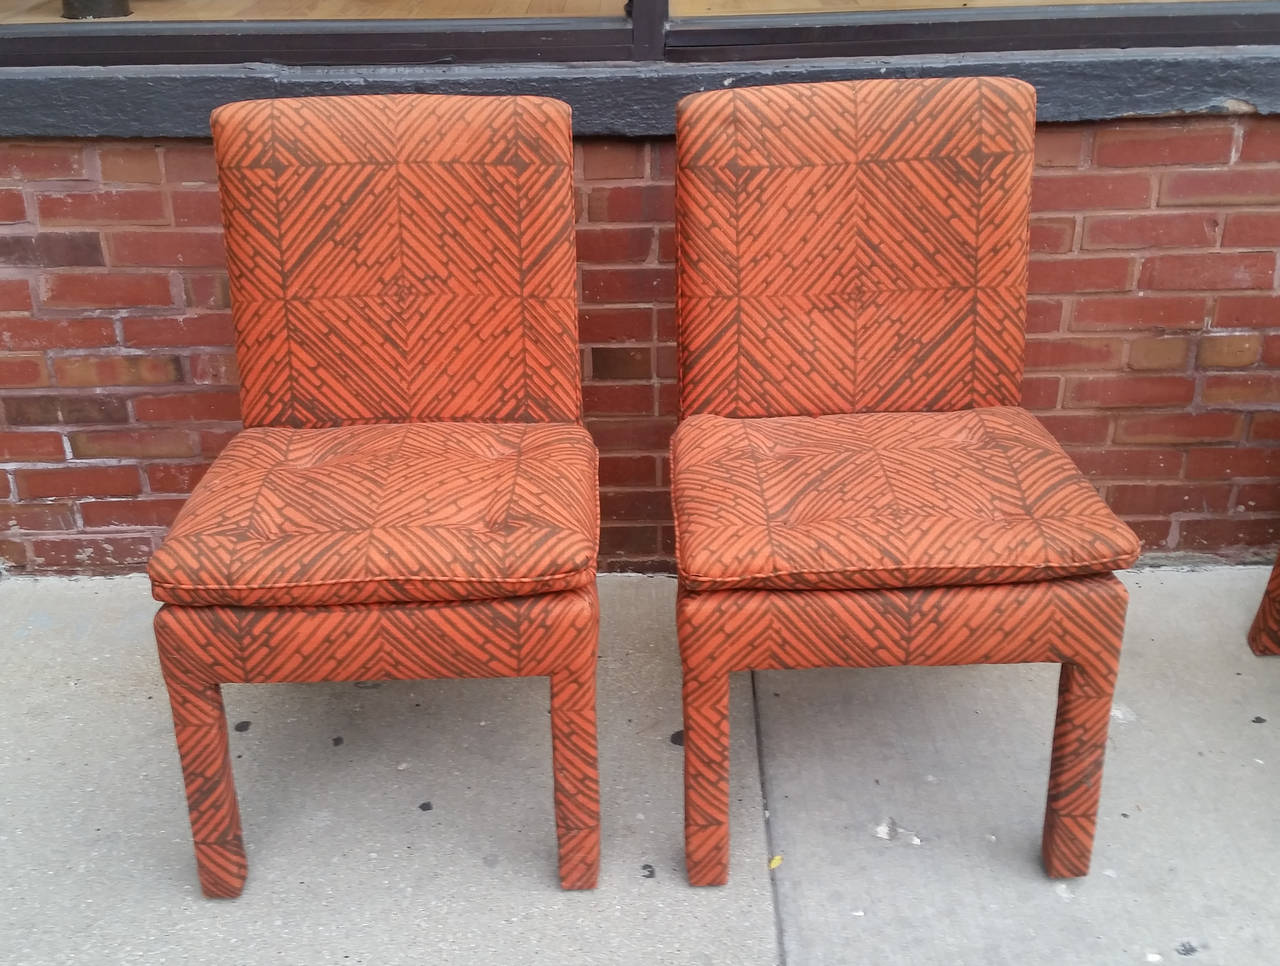 A set of six 1970's fully upholstered dining chairs by Milo Baughman
for Thayer Coggin. The set includes two-arm or captain’s chairs
and four side chairs. The fabric is in good vintage condition but could be
updated.